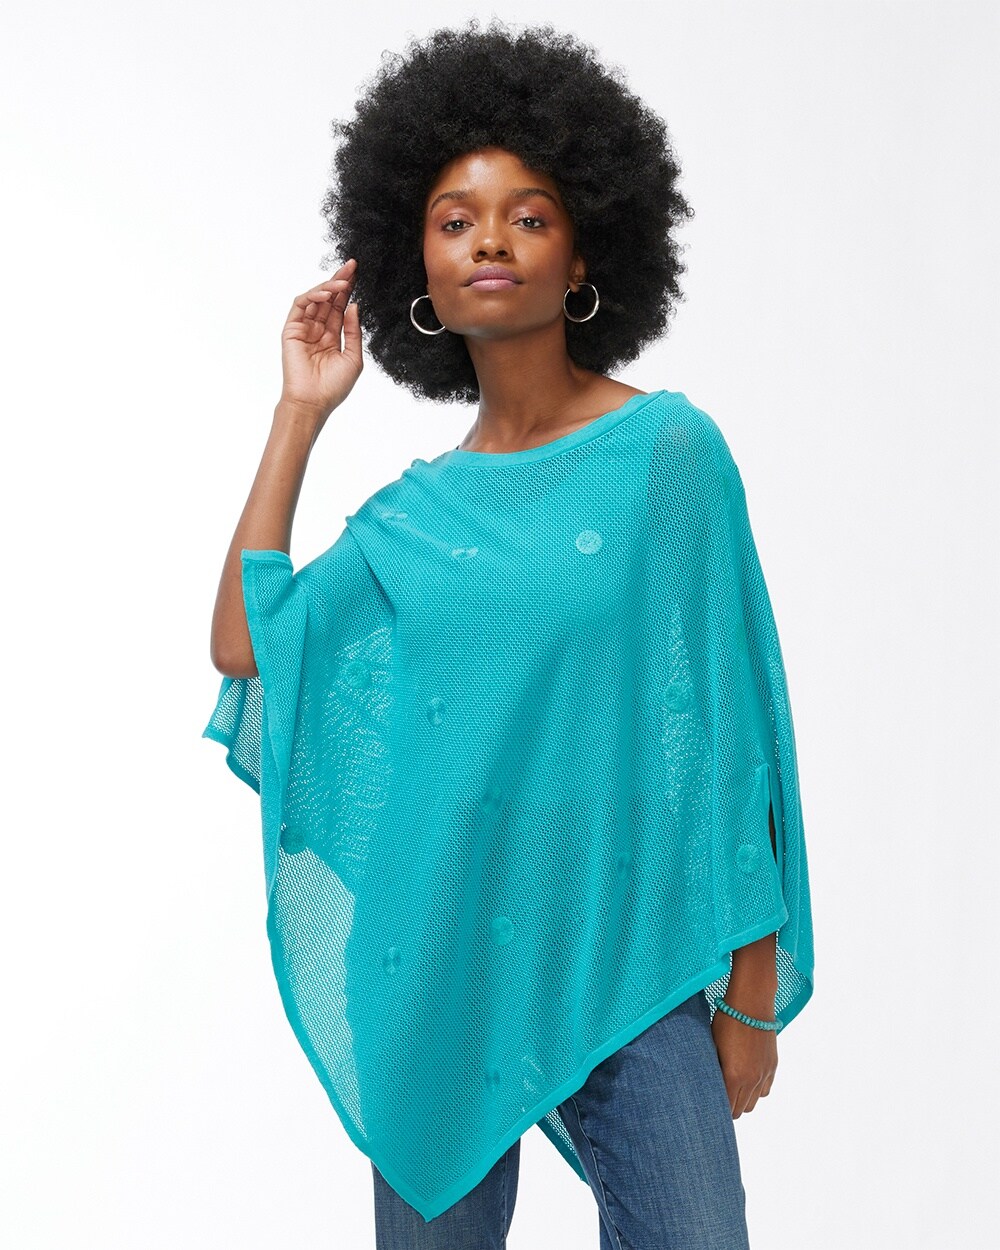 Embroidered Daisy Mesh Poncho video preview image, click to start video